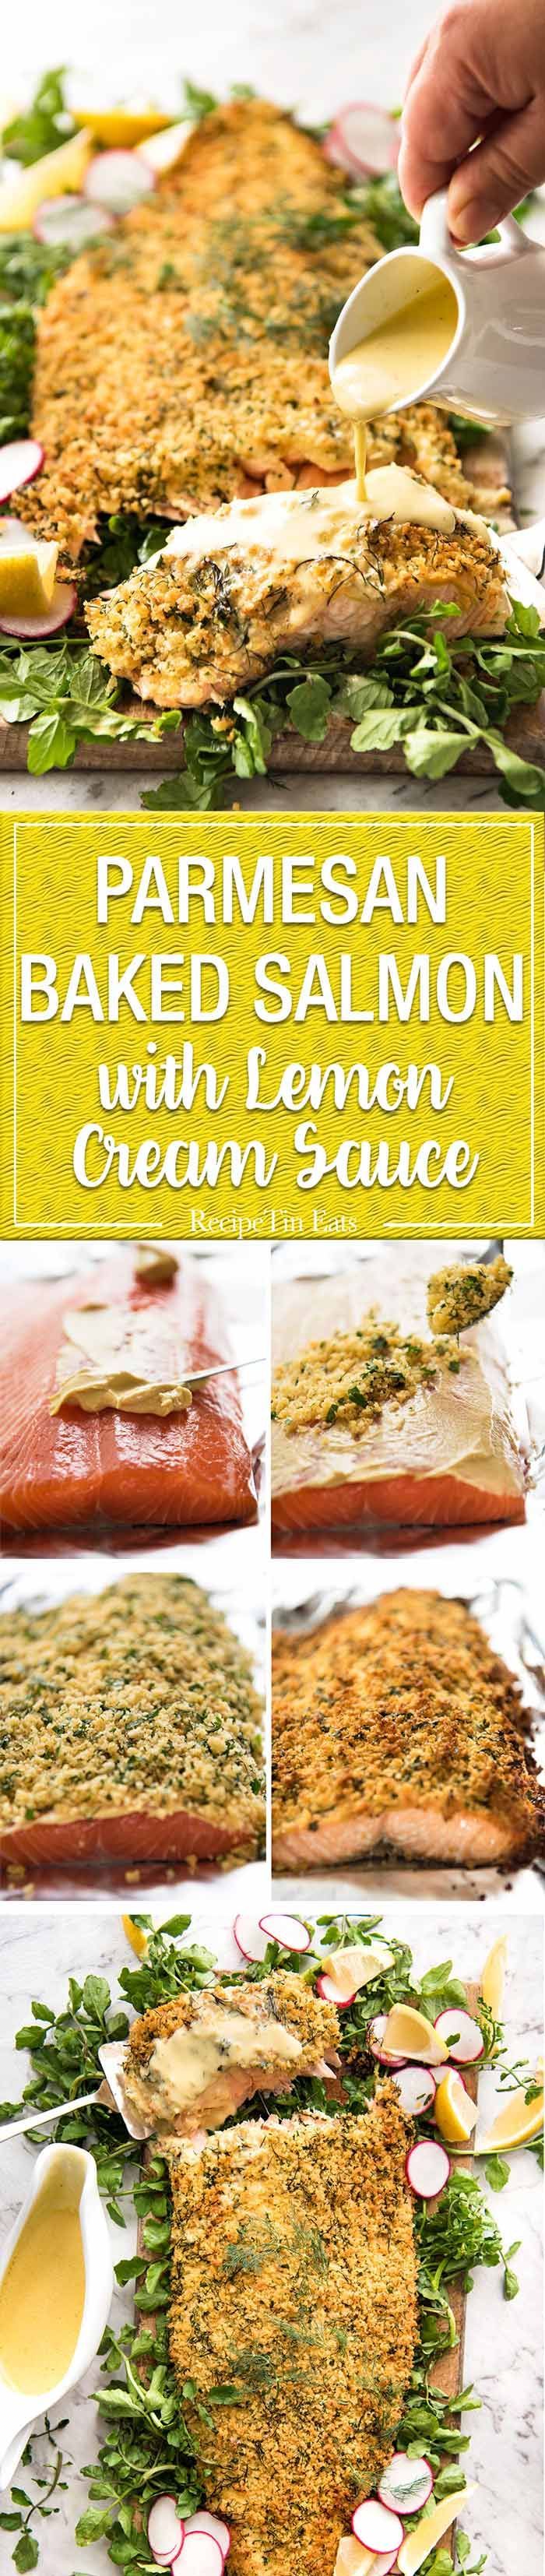 Baked Parmesan Crusted Salmon with Lemon Cream Sauce – easy and fast to make, can